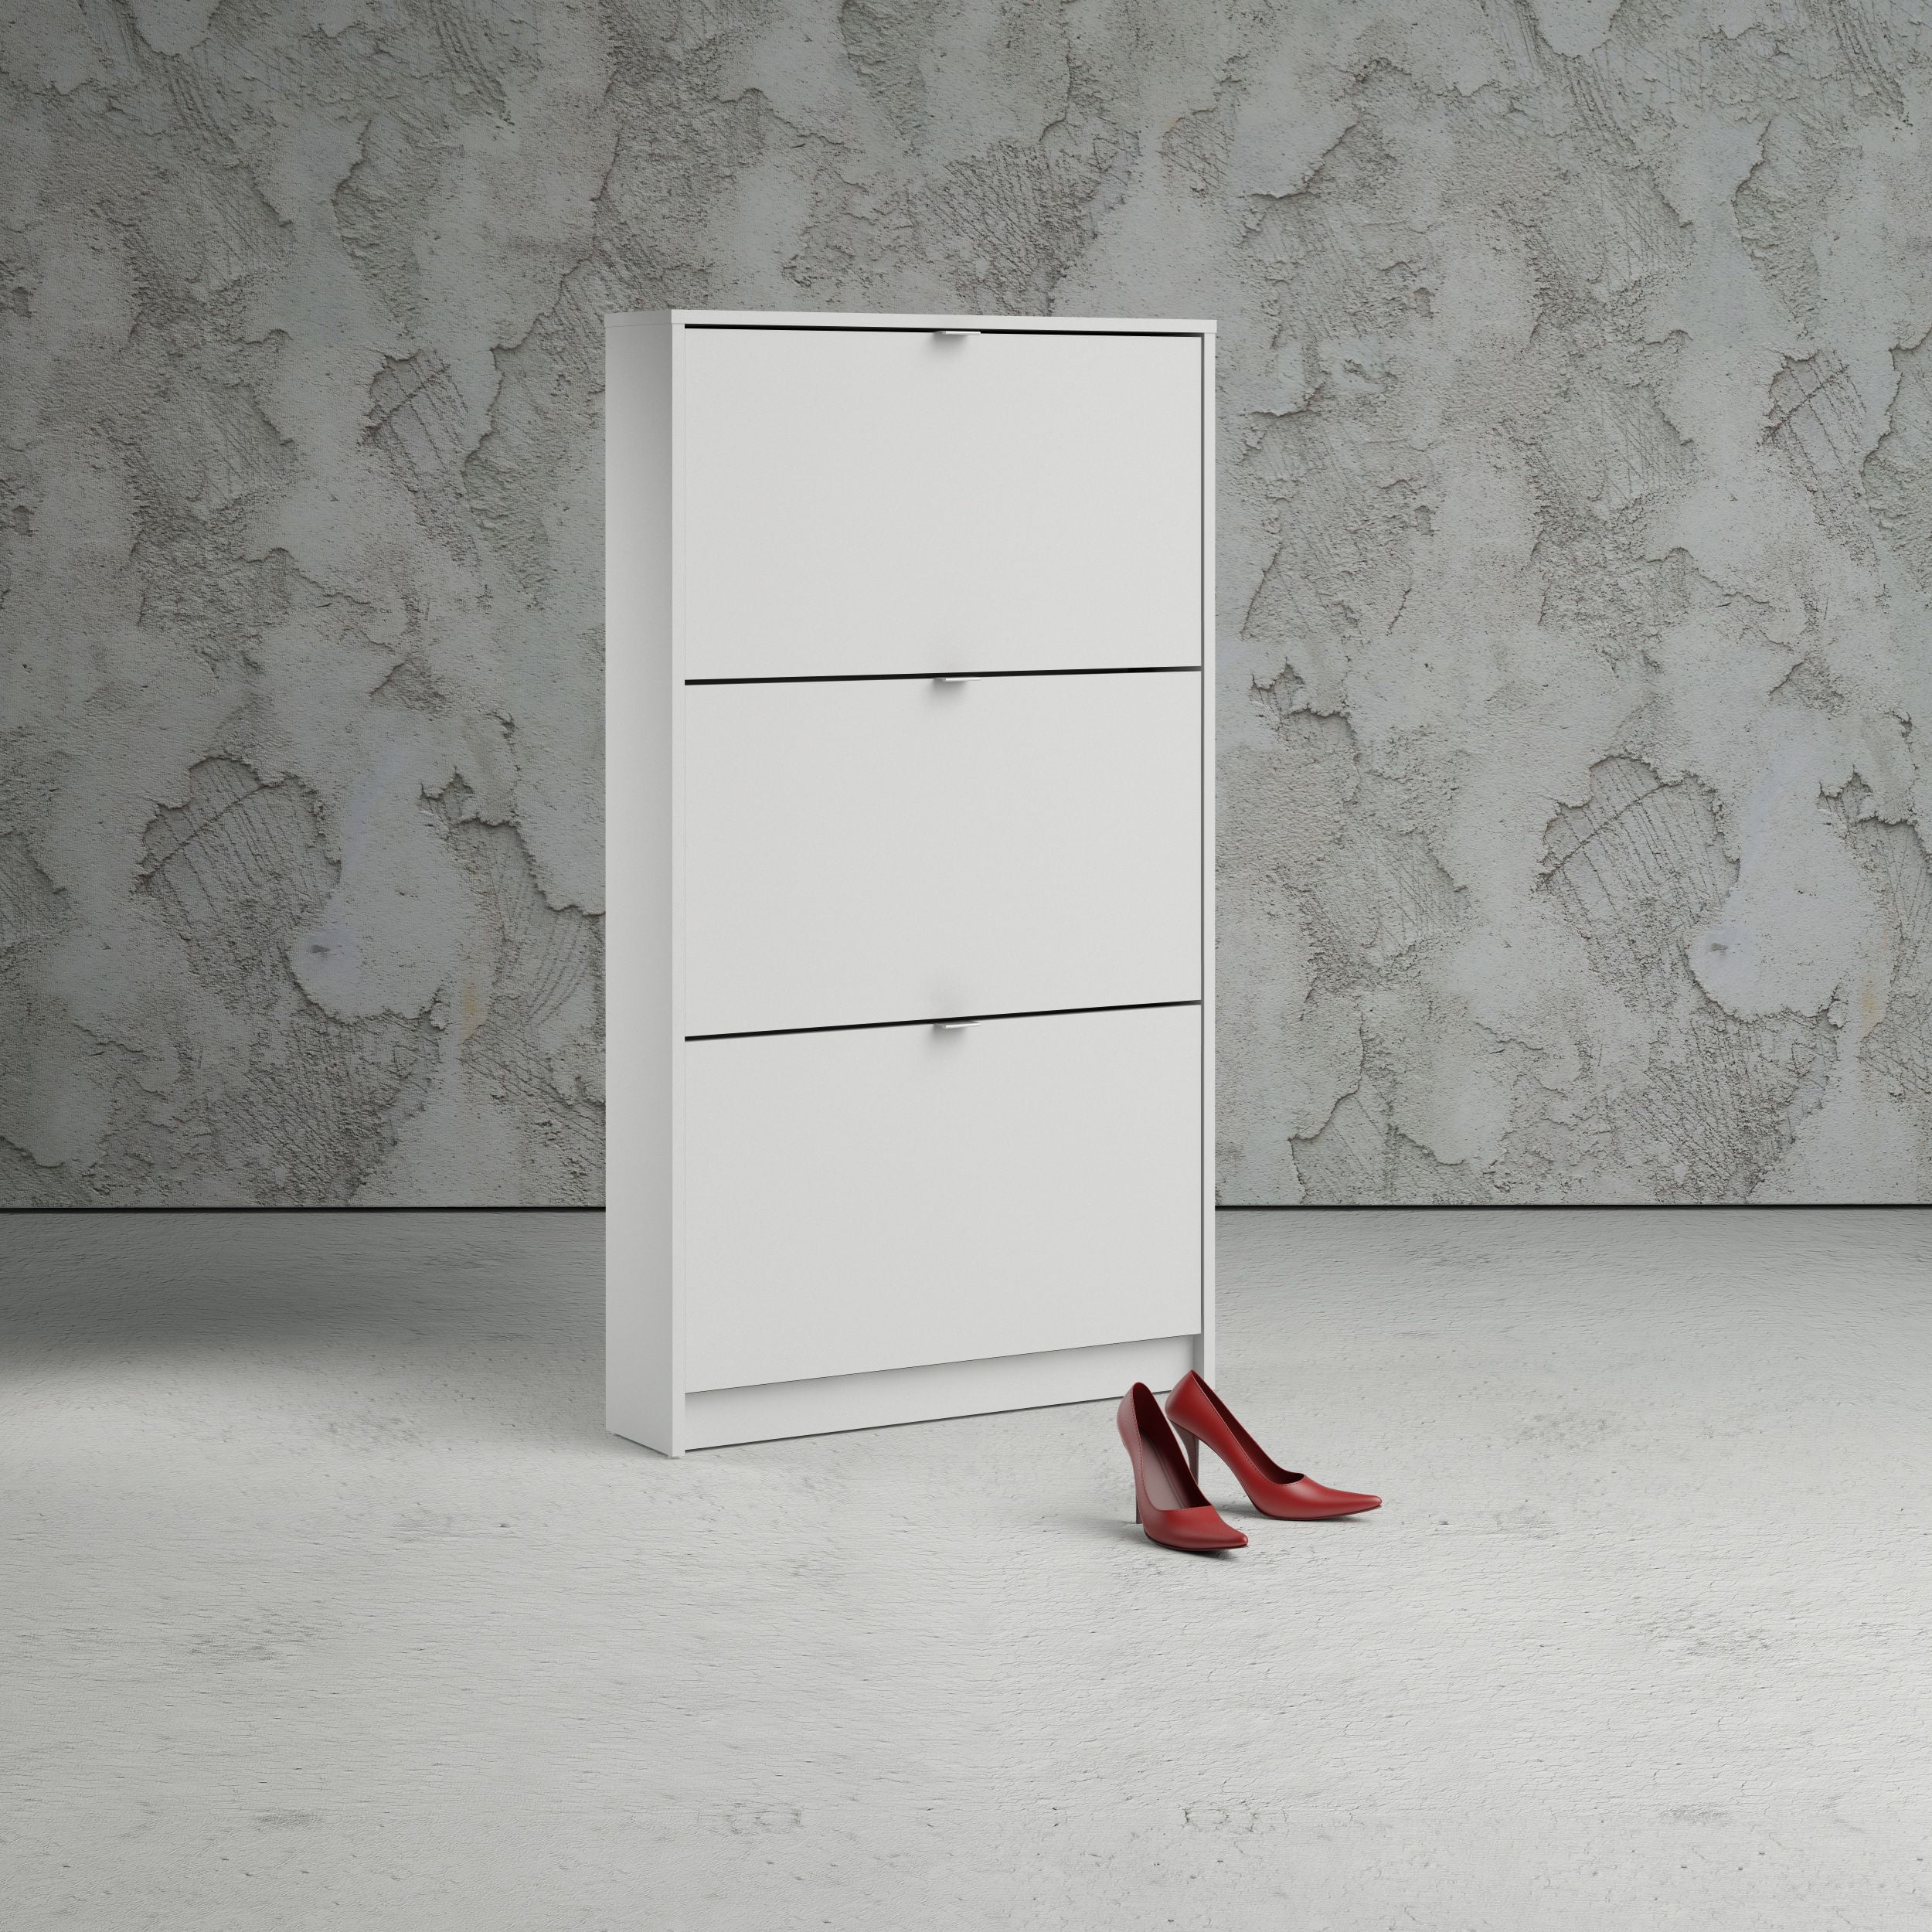 BYBLIGHT 39.4 in. H x 31.5 in. W White Shoe Storage Cabinet with